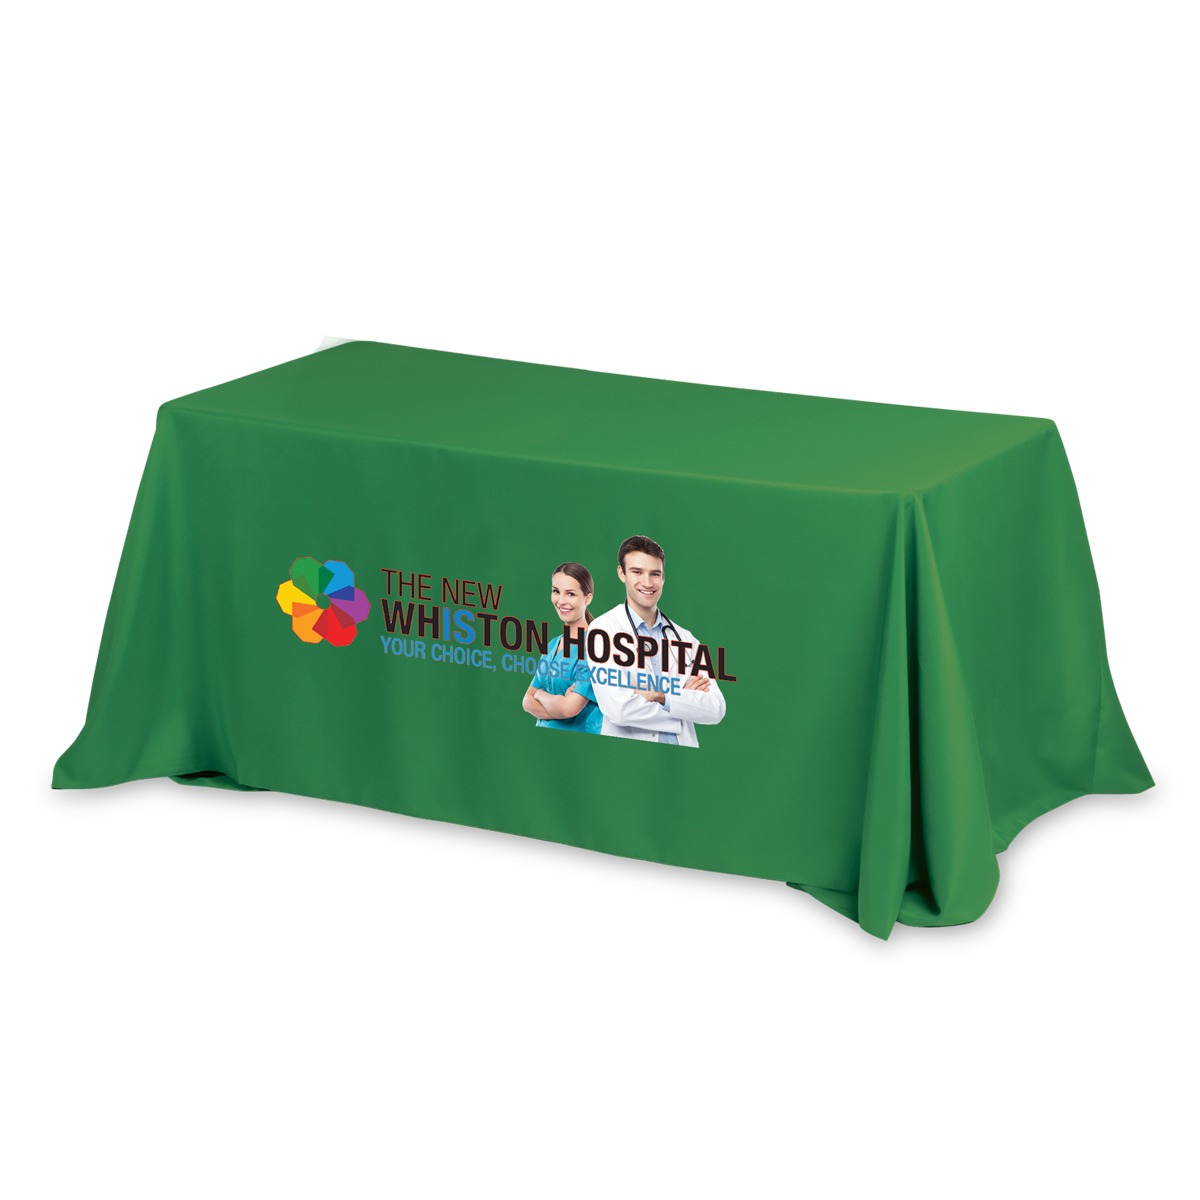 "ZENYATTA EIGHT" 8 ft 4-Sided Throw Style Table Covers & Table Throws (PhotoImage Full Color) / Fits 8 ft Table